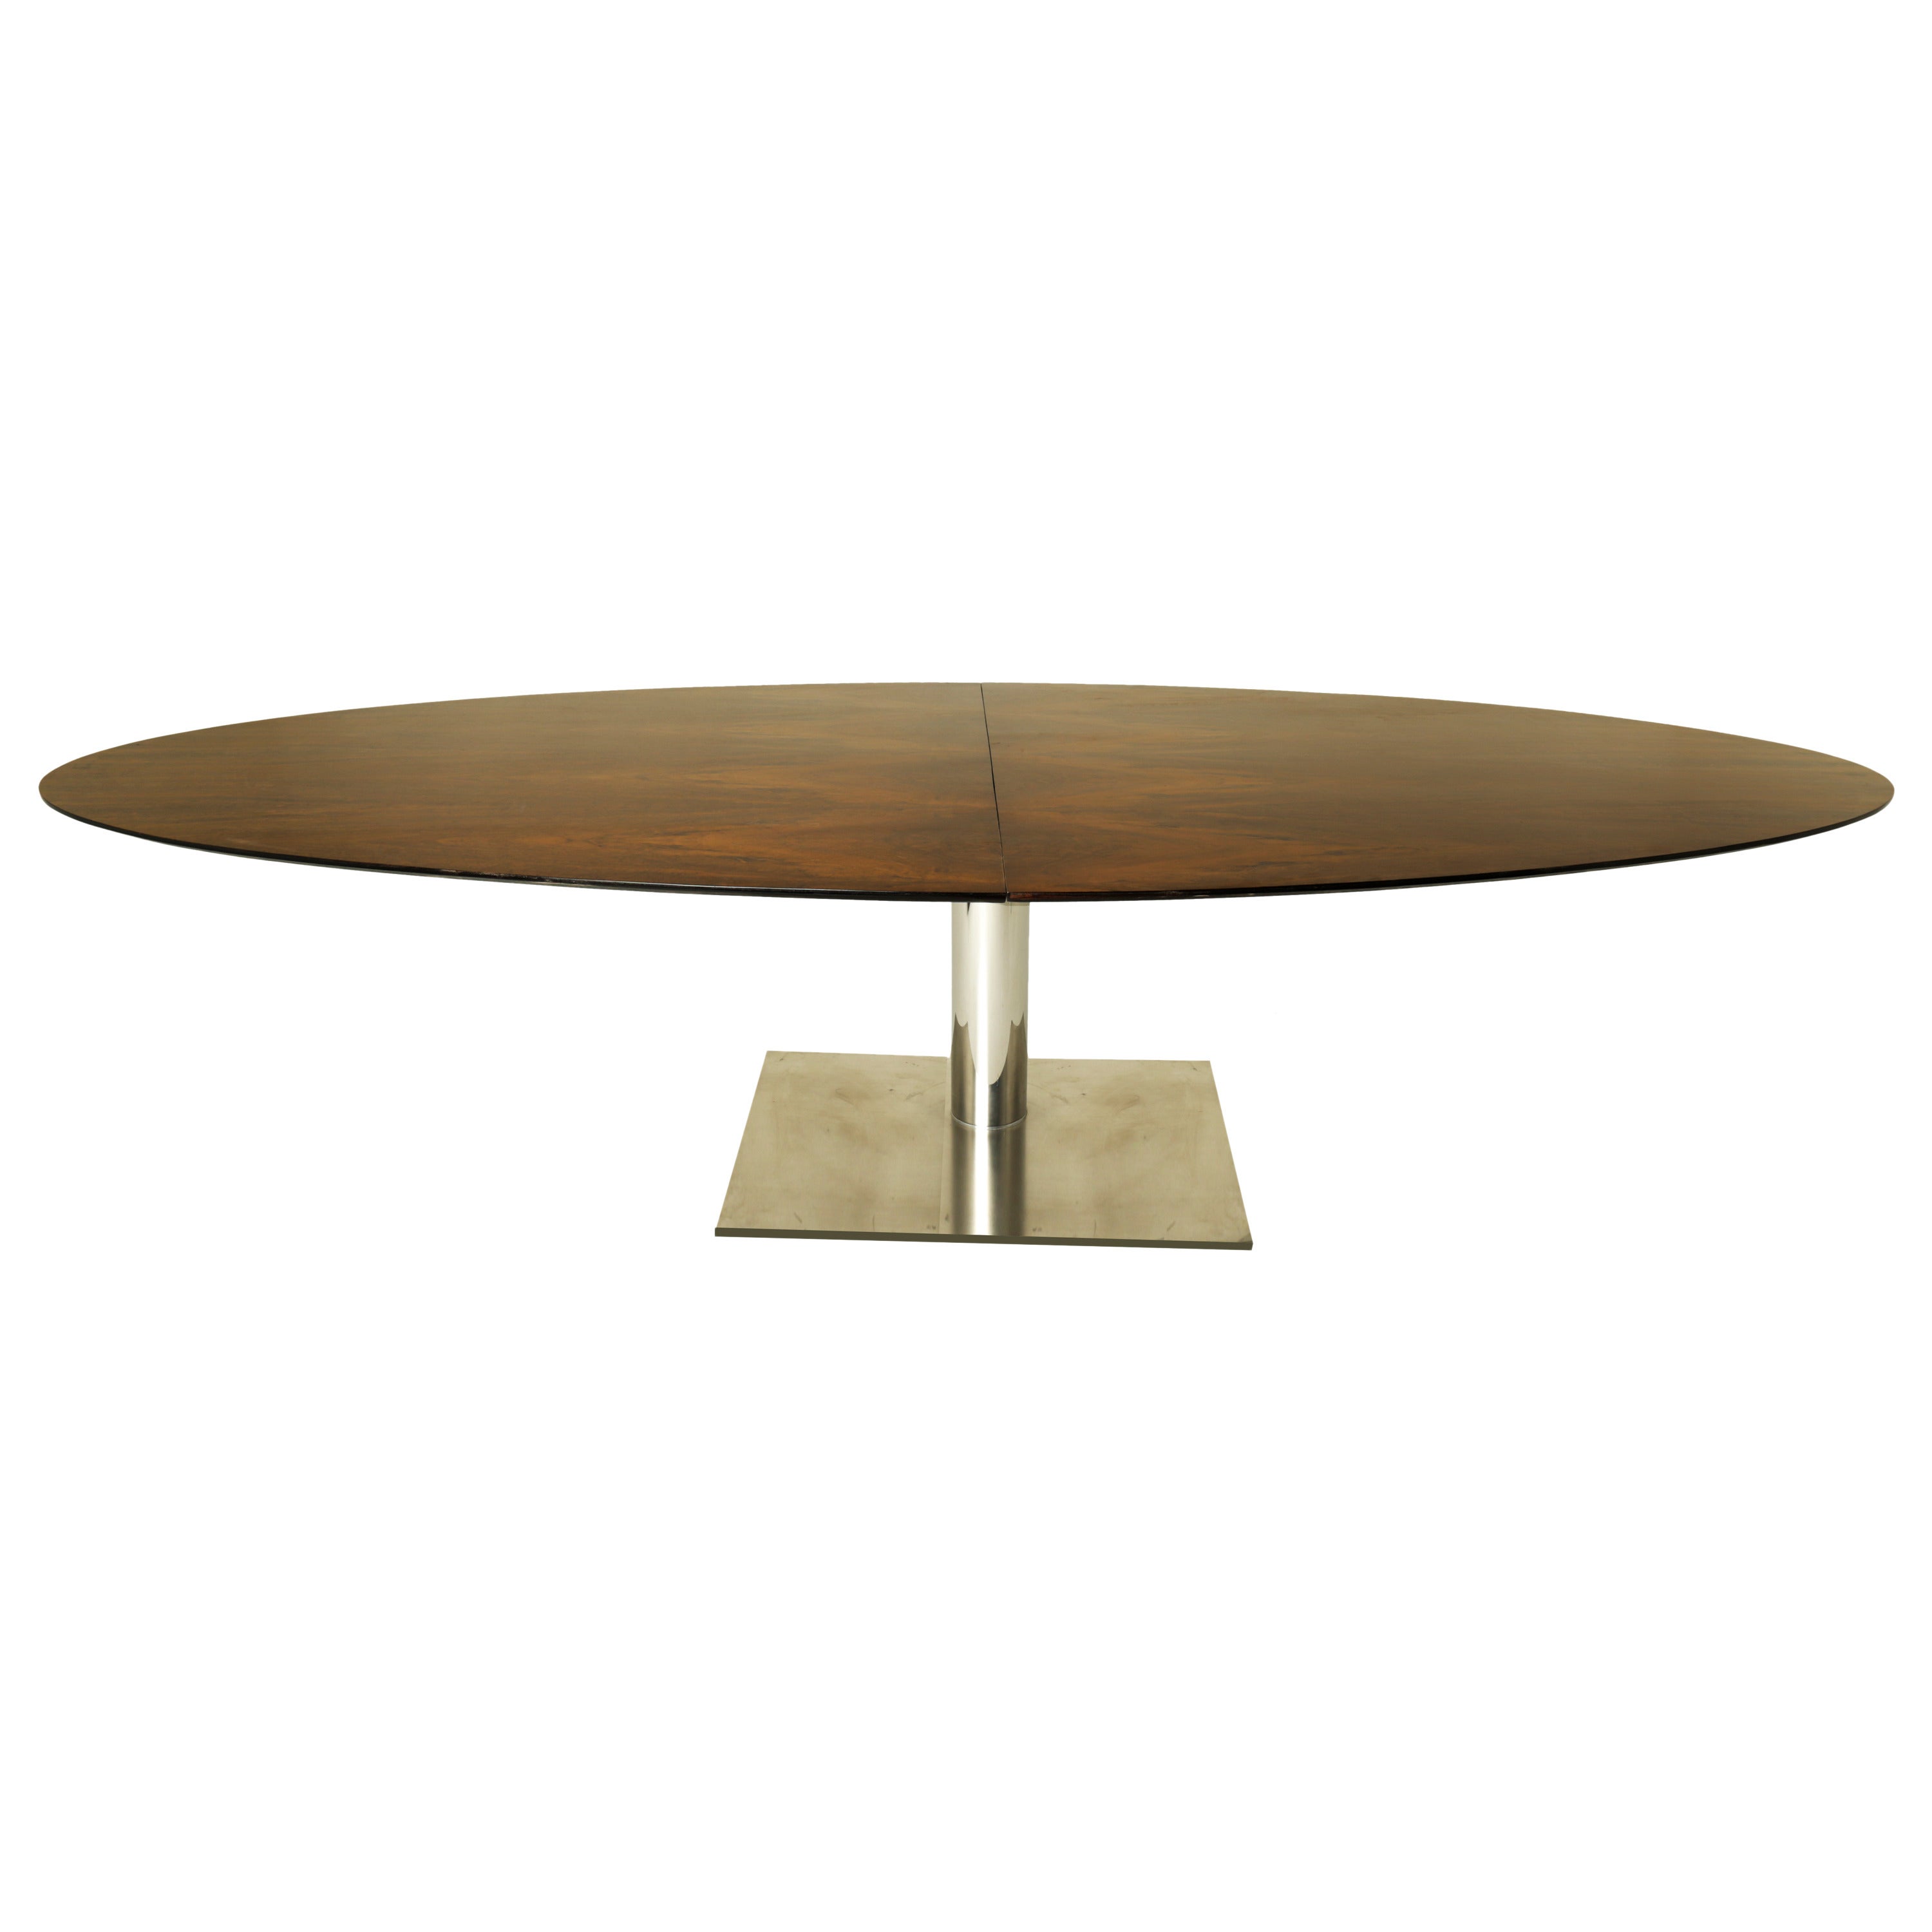 Brazilian Oval Imbuia Wood Dining Table with Stainless Base For Sale